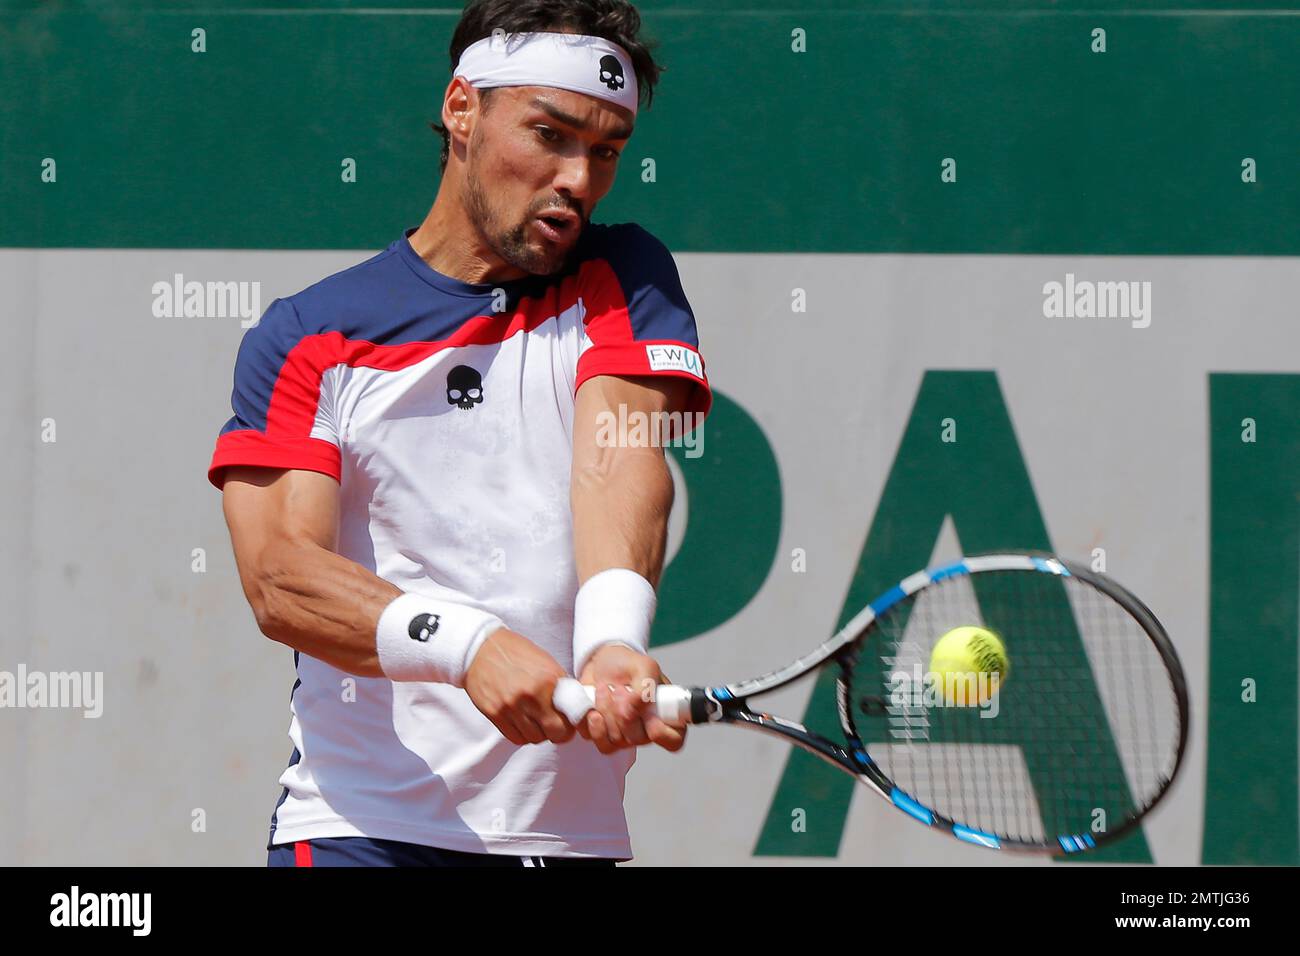 Italy's Fabio Fognini returns the ball to compatriot Andreas Seppi during  their second round match of the French Open tennis tournament at the Roland  Garros stadium, Thursday, June 1, 2017 in Paris. (